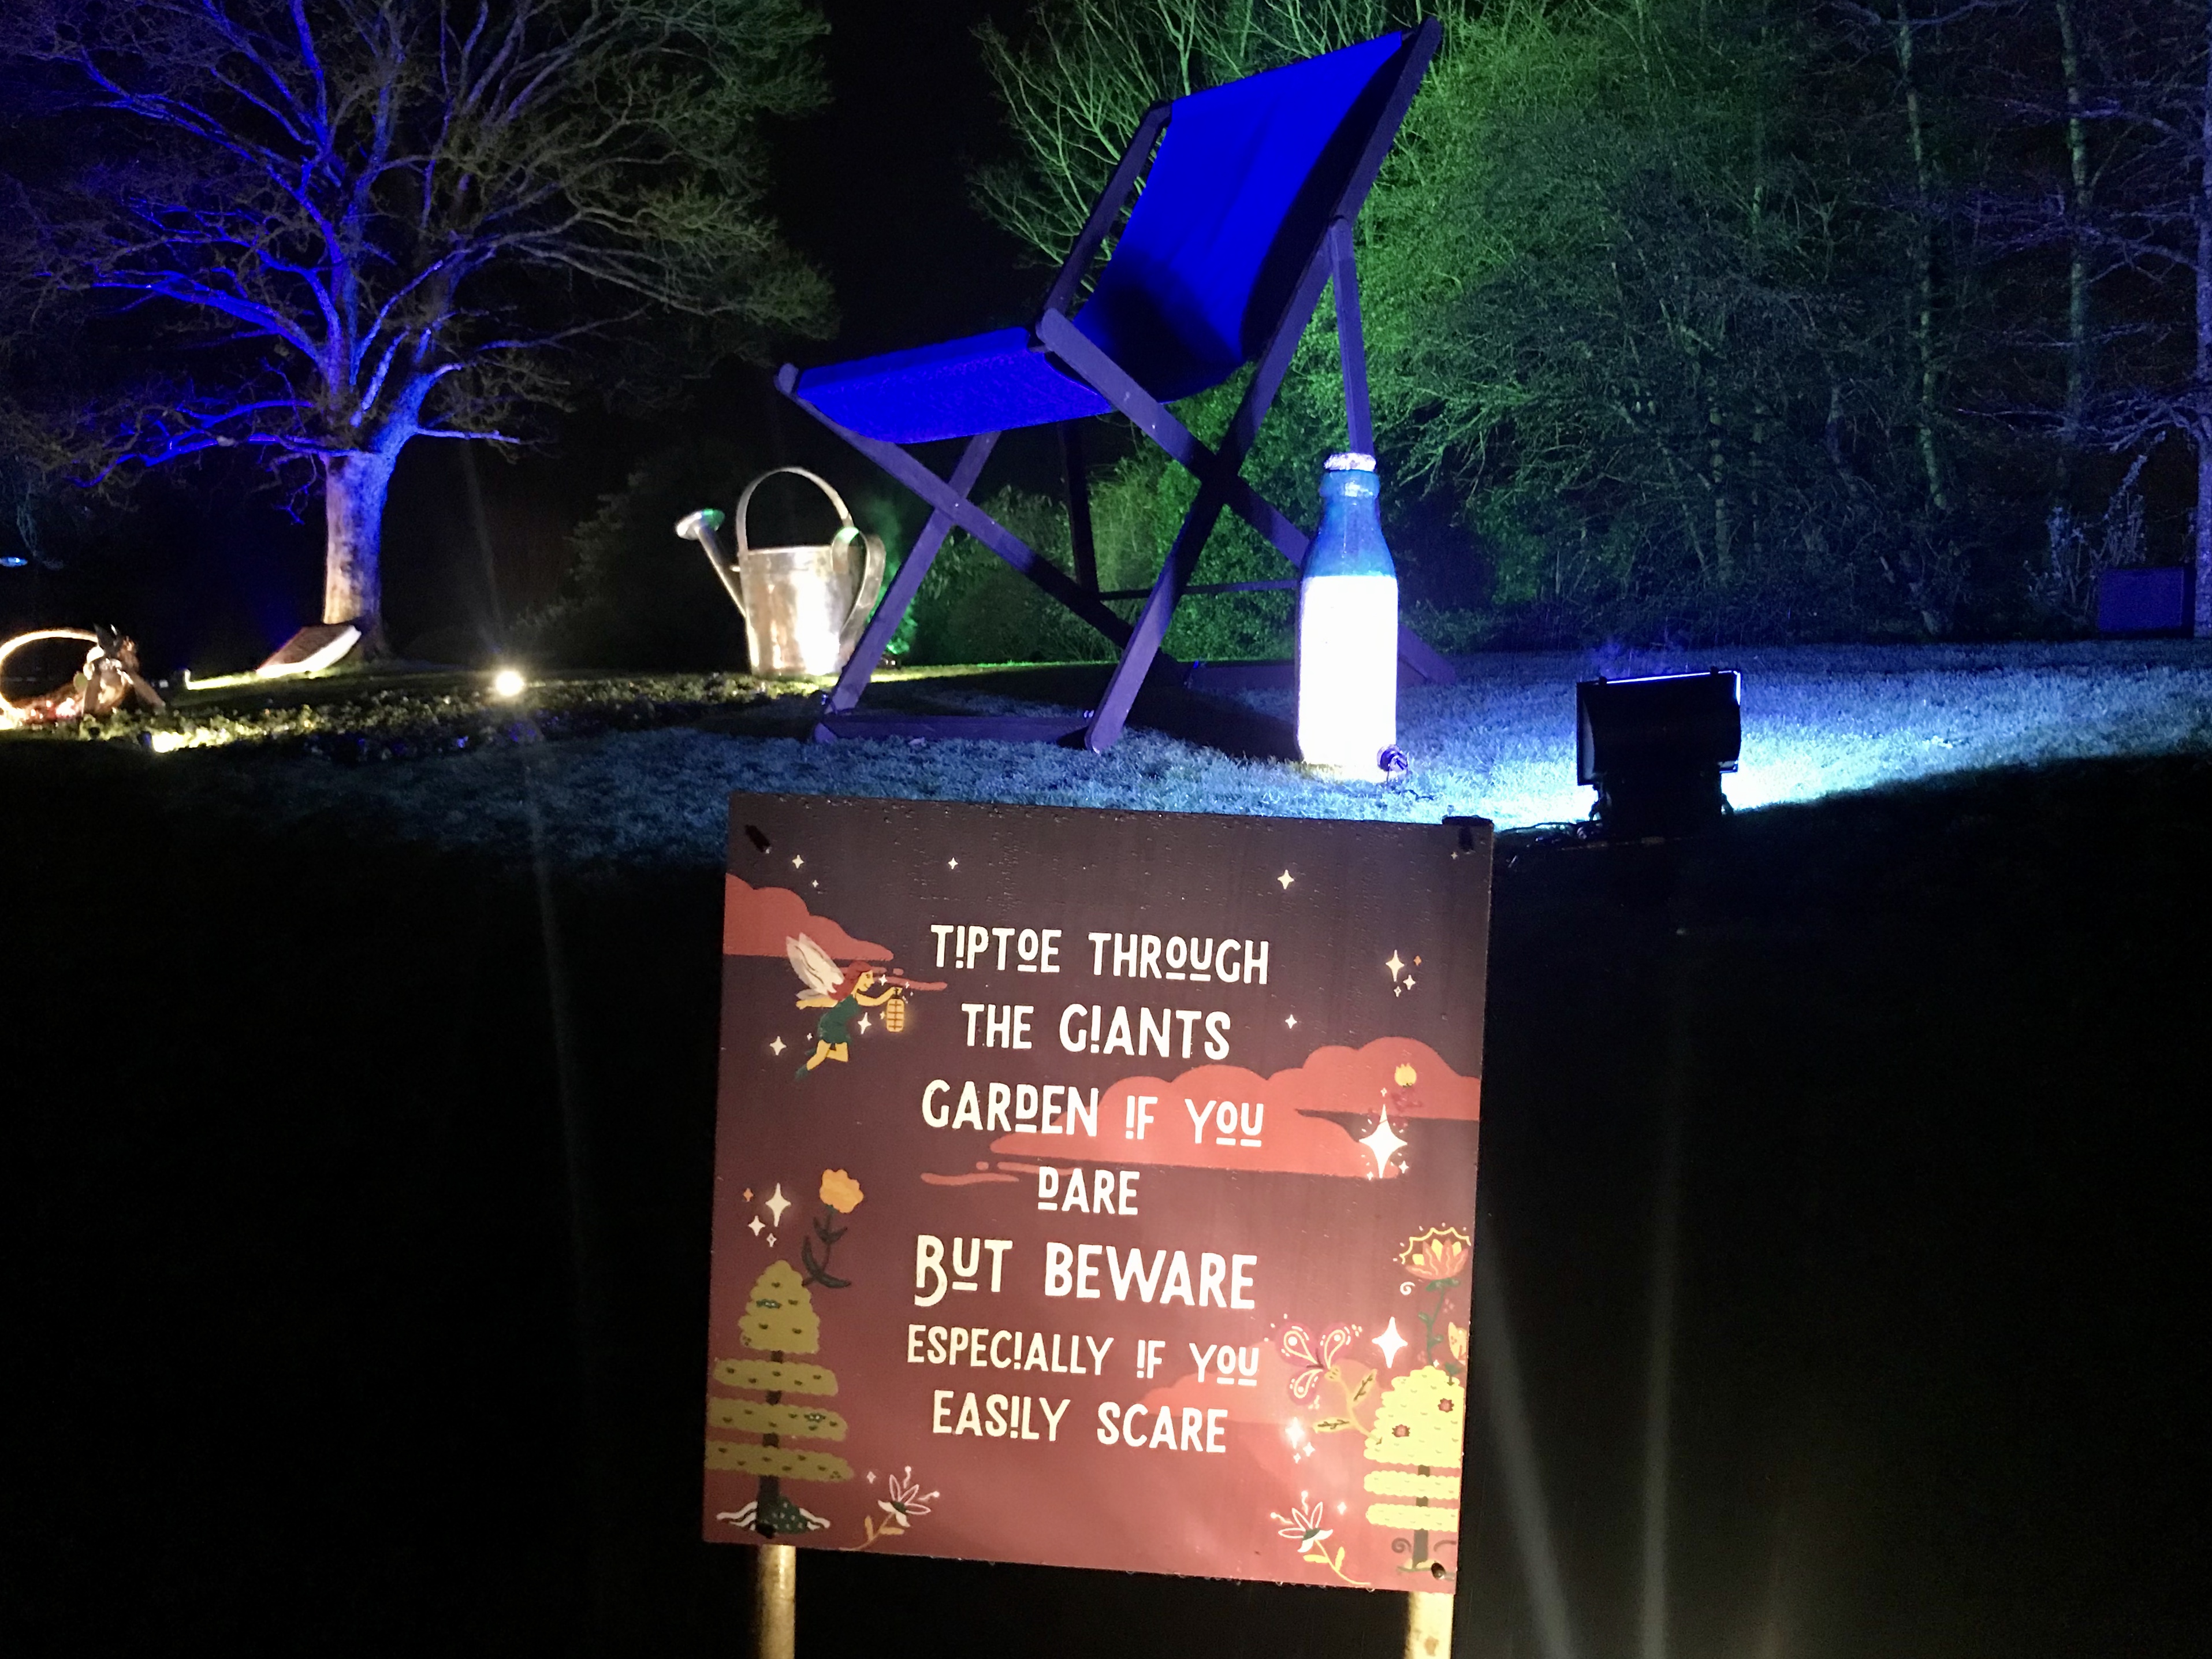 A Review Of Alexandra S Enchanted Garden The Magical Light Trail At Alexandra Park Penarth Cardiff Mummy Sayscardiff Mummy Says